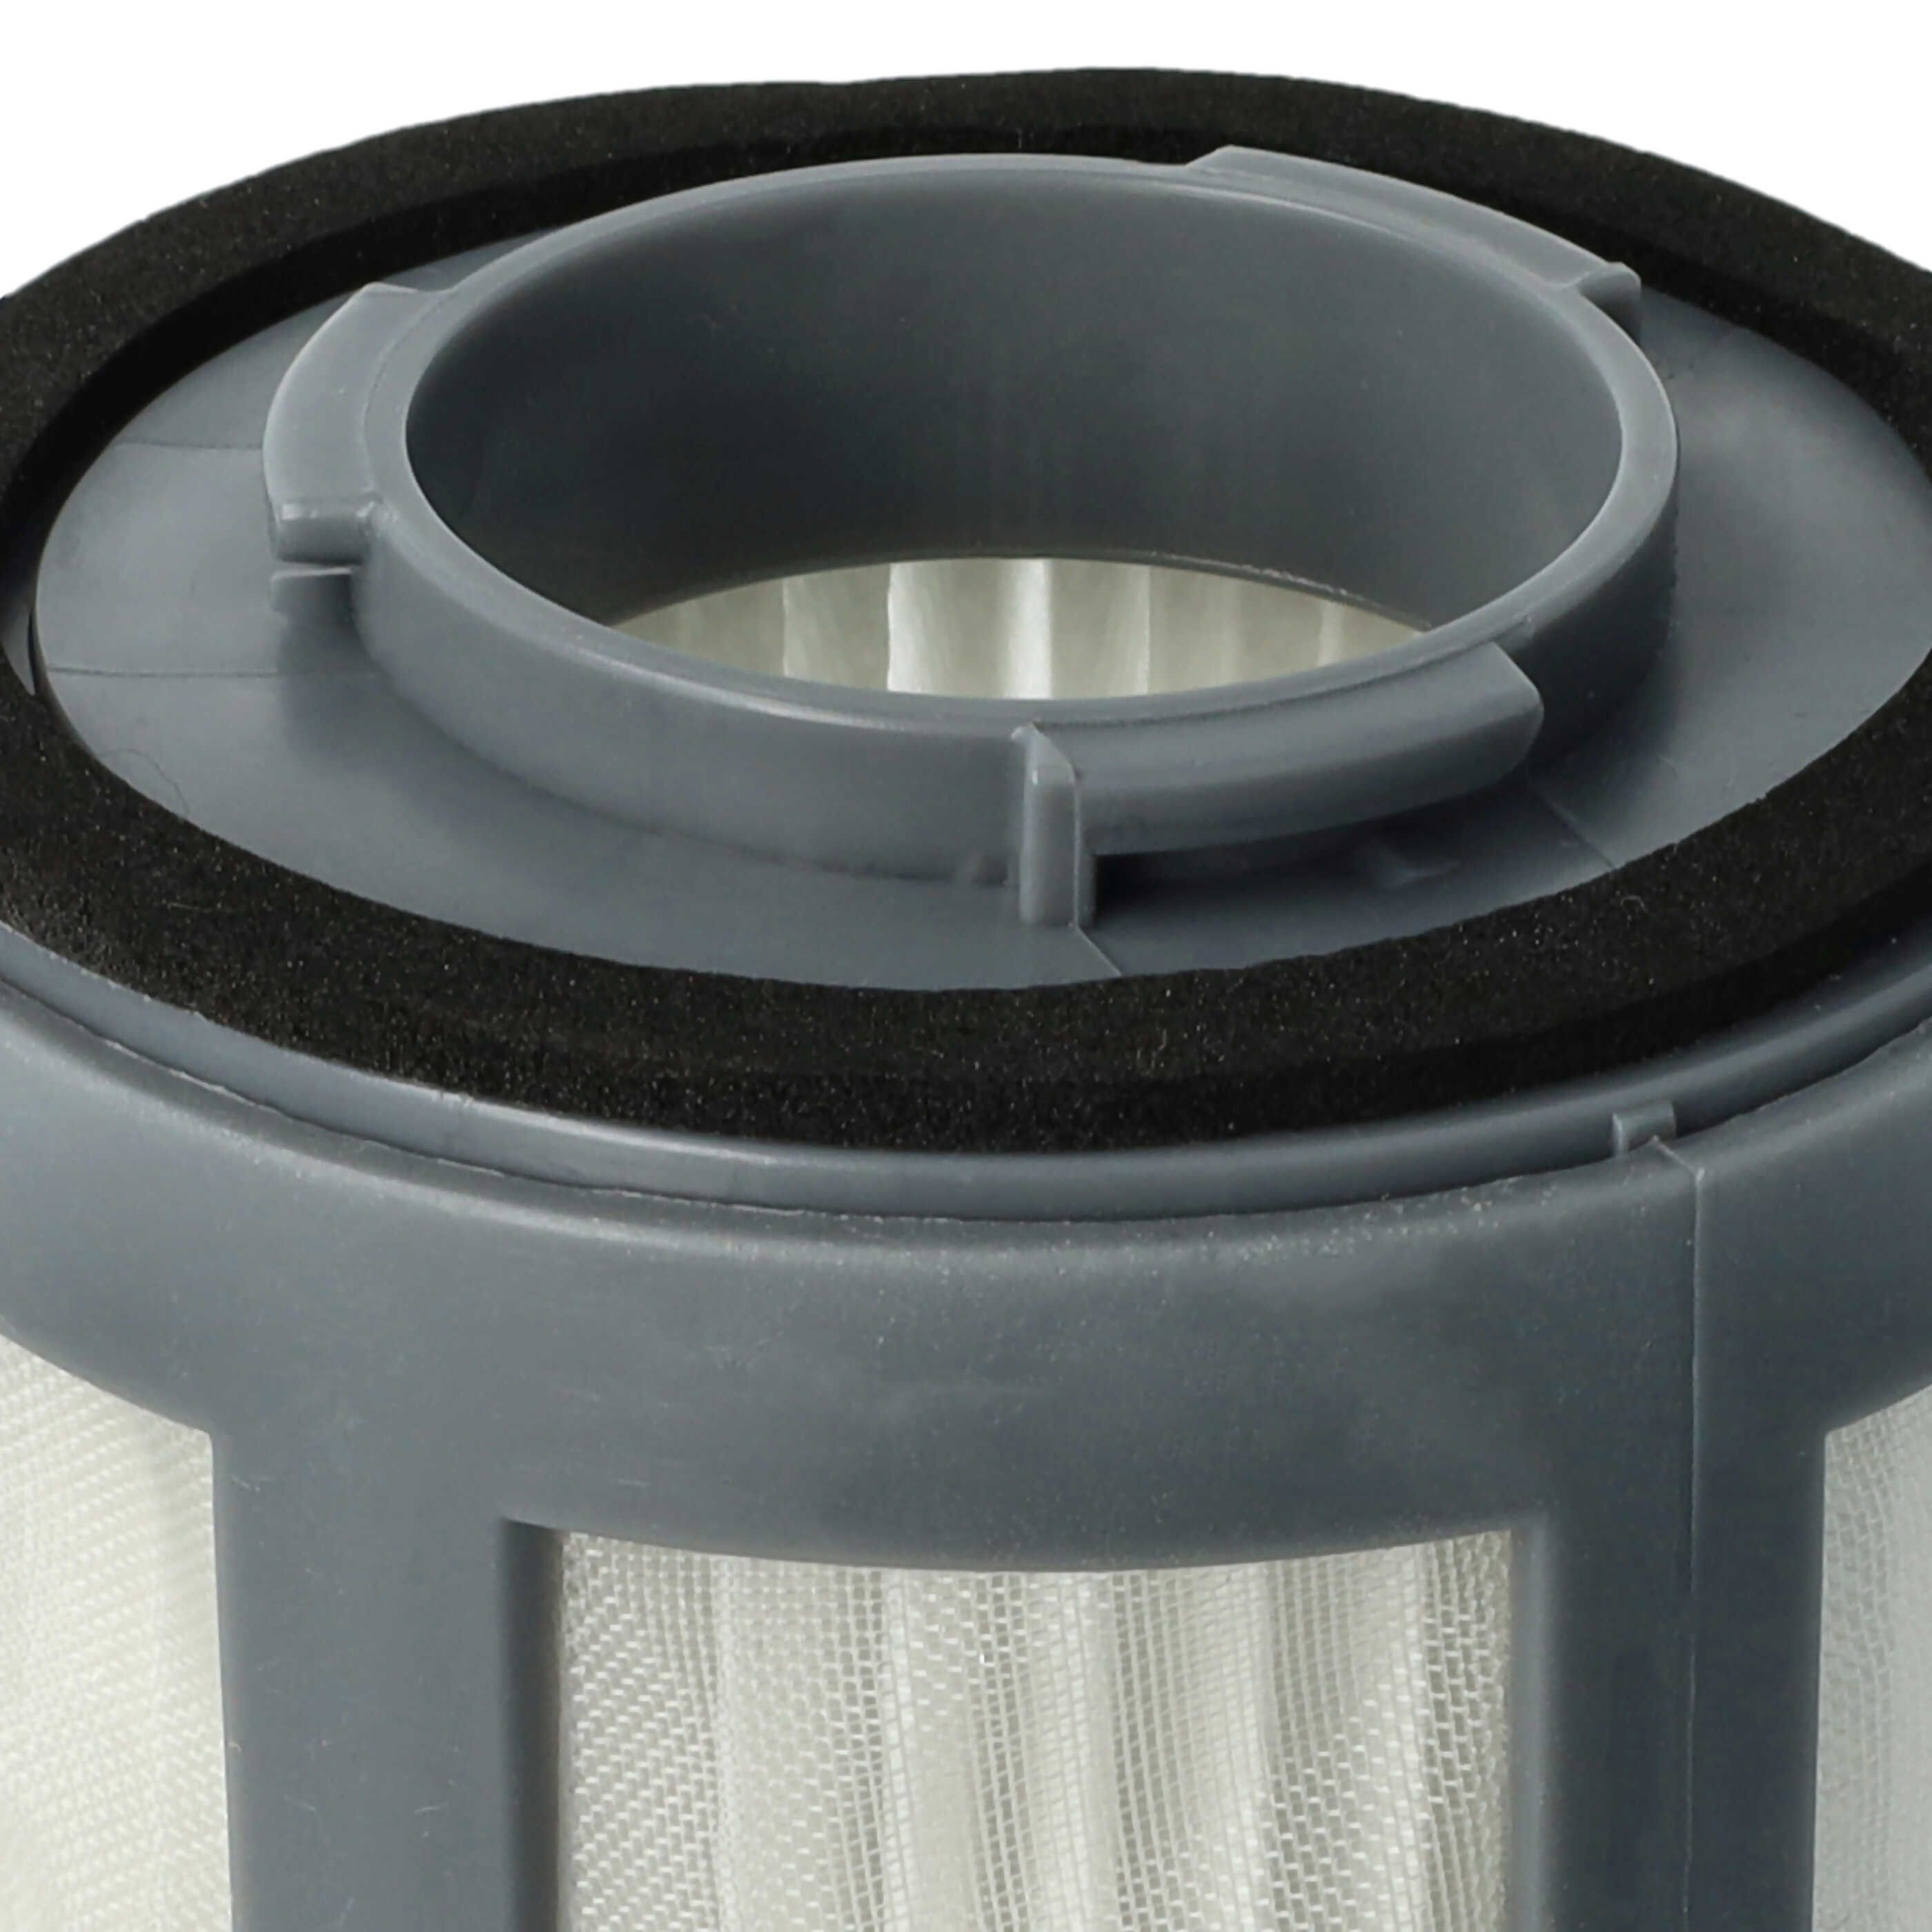 1x filter insert (nylon + HEPA filter) suitable for BS 9012 CB Eco Cyclon Bomann Vacuum Cleaner